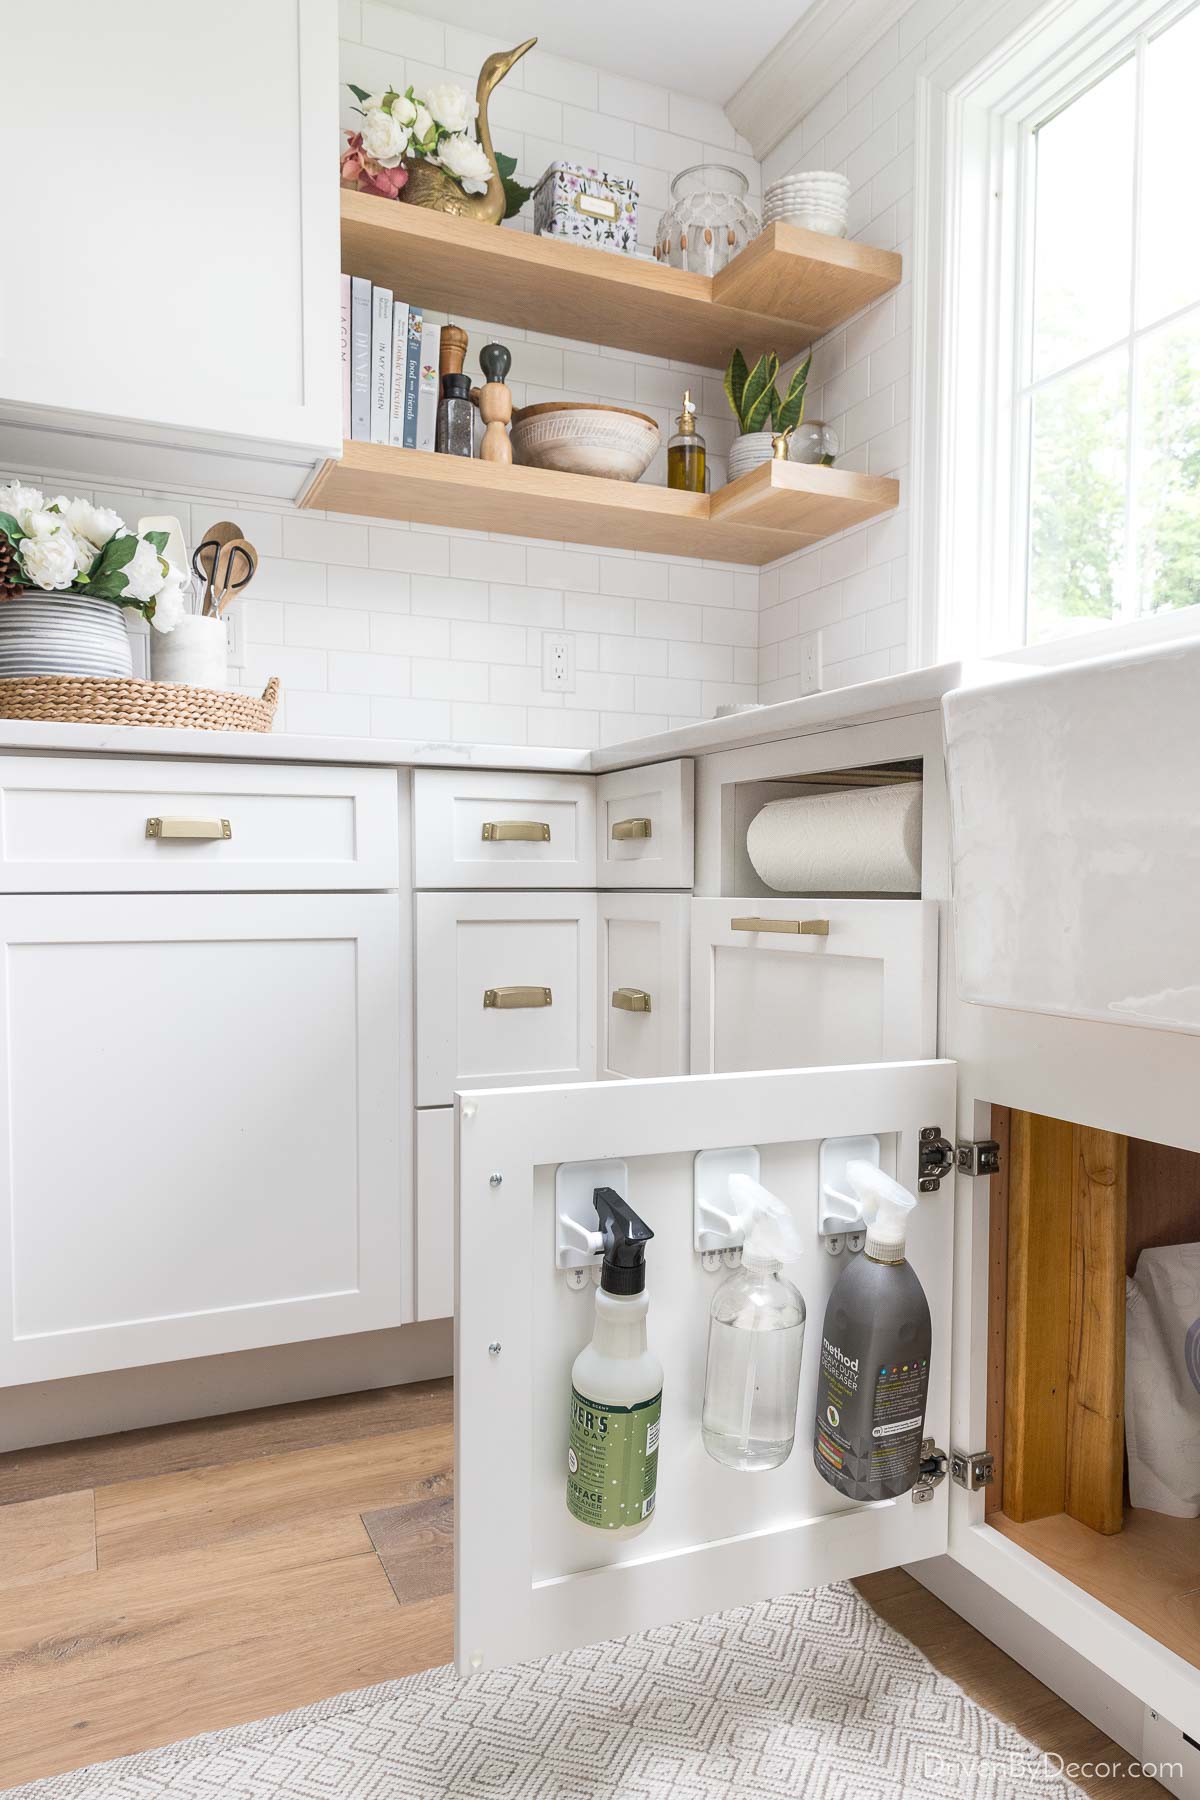 10 Affordable Storage Solutions to Organize Your Kitchen Cabinets